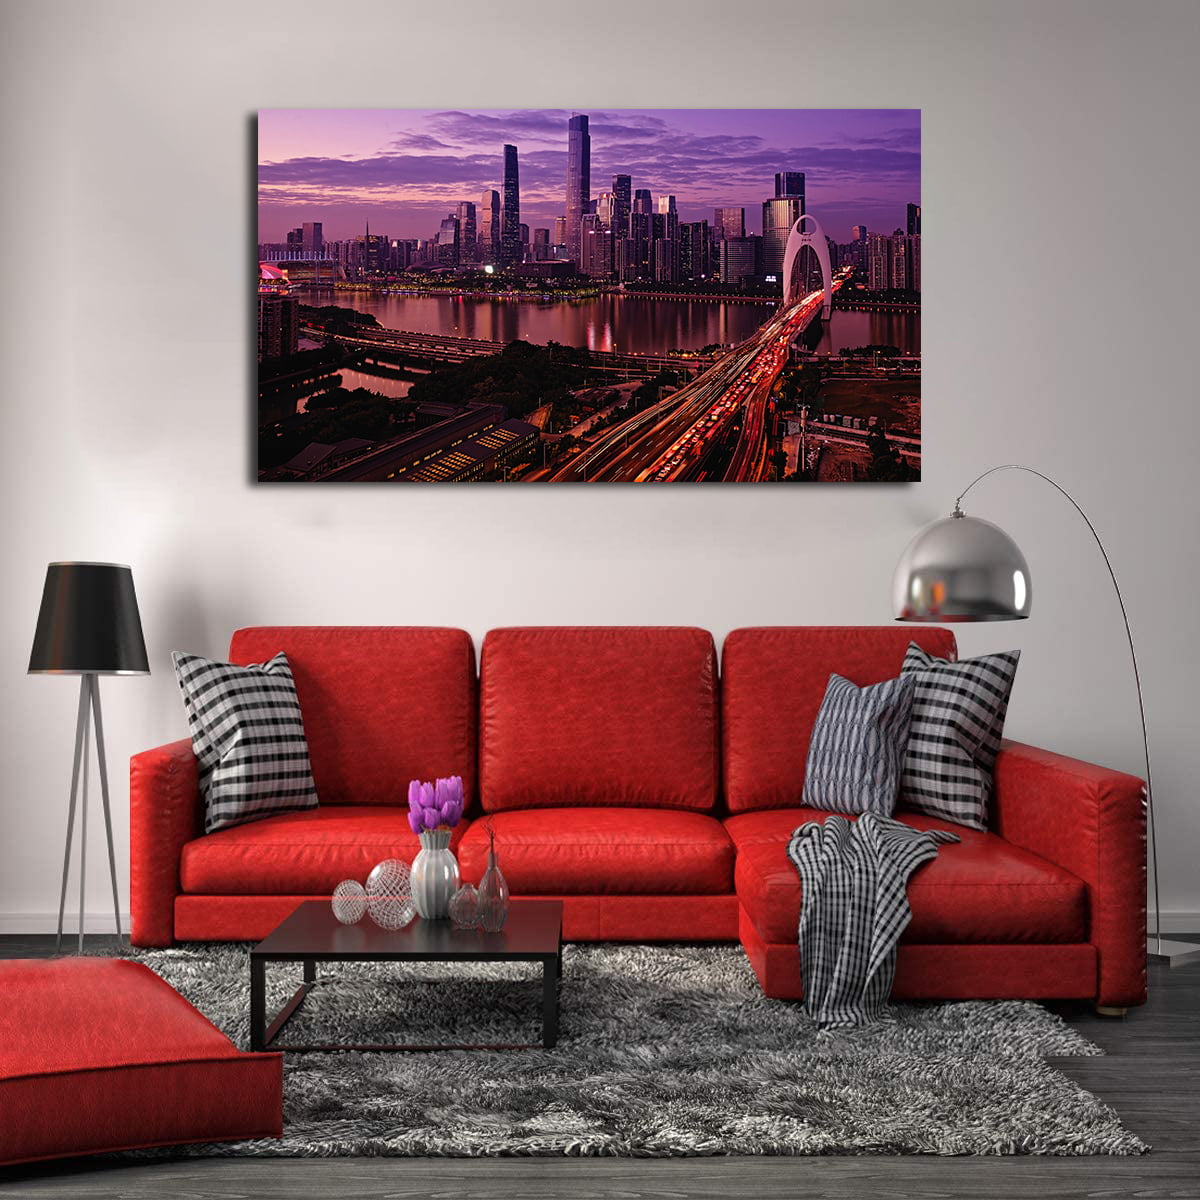 City Night View Wall Art City Skyline Picture Canvas Art Downtown Night  Framed Painting Wall Decor For Home Office Bedroom Livingroom Ready to Hang 